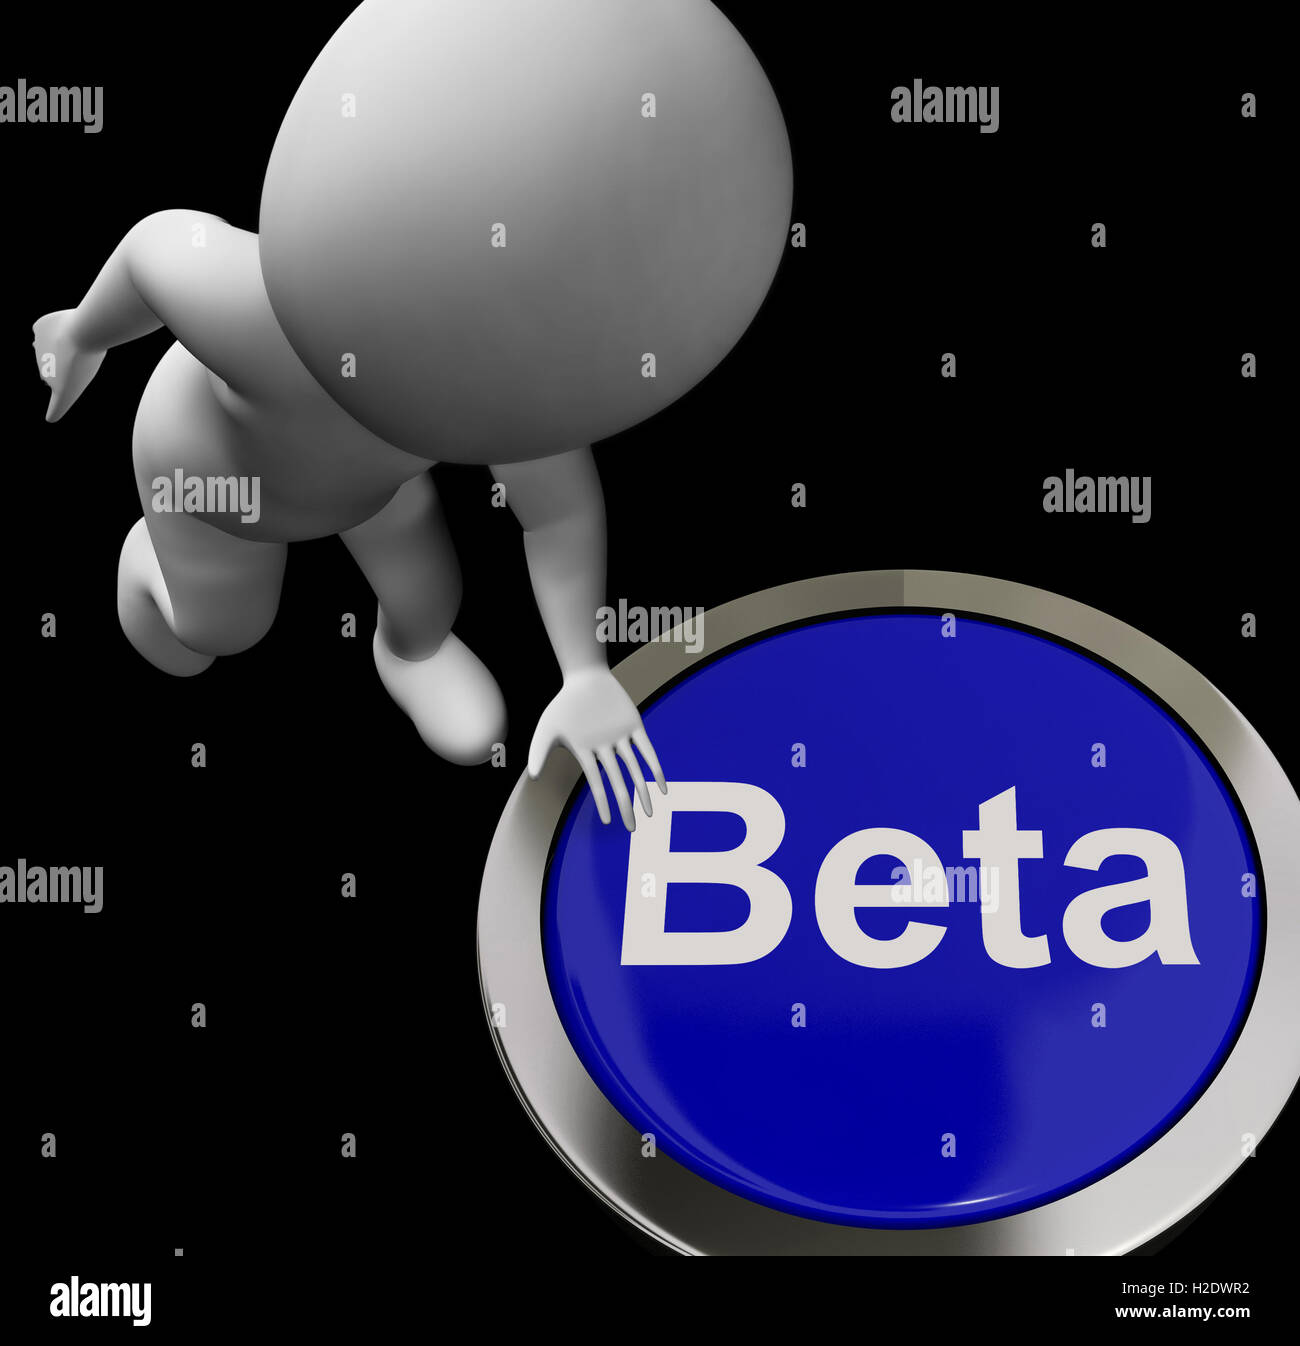 Beta Button Shows Software Testing And Development Stock Photo